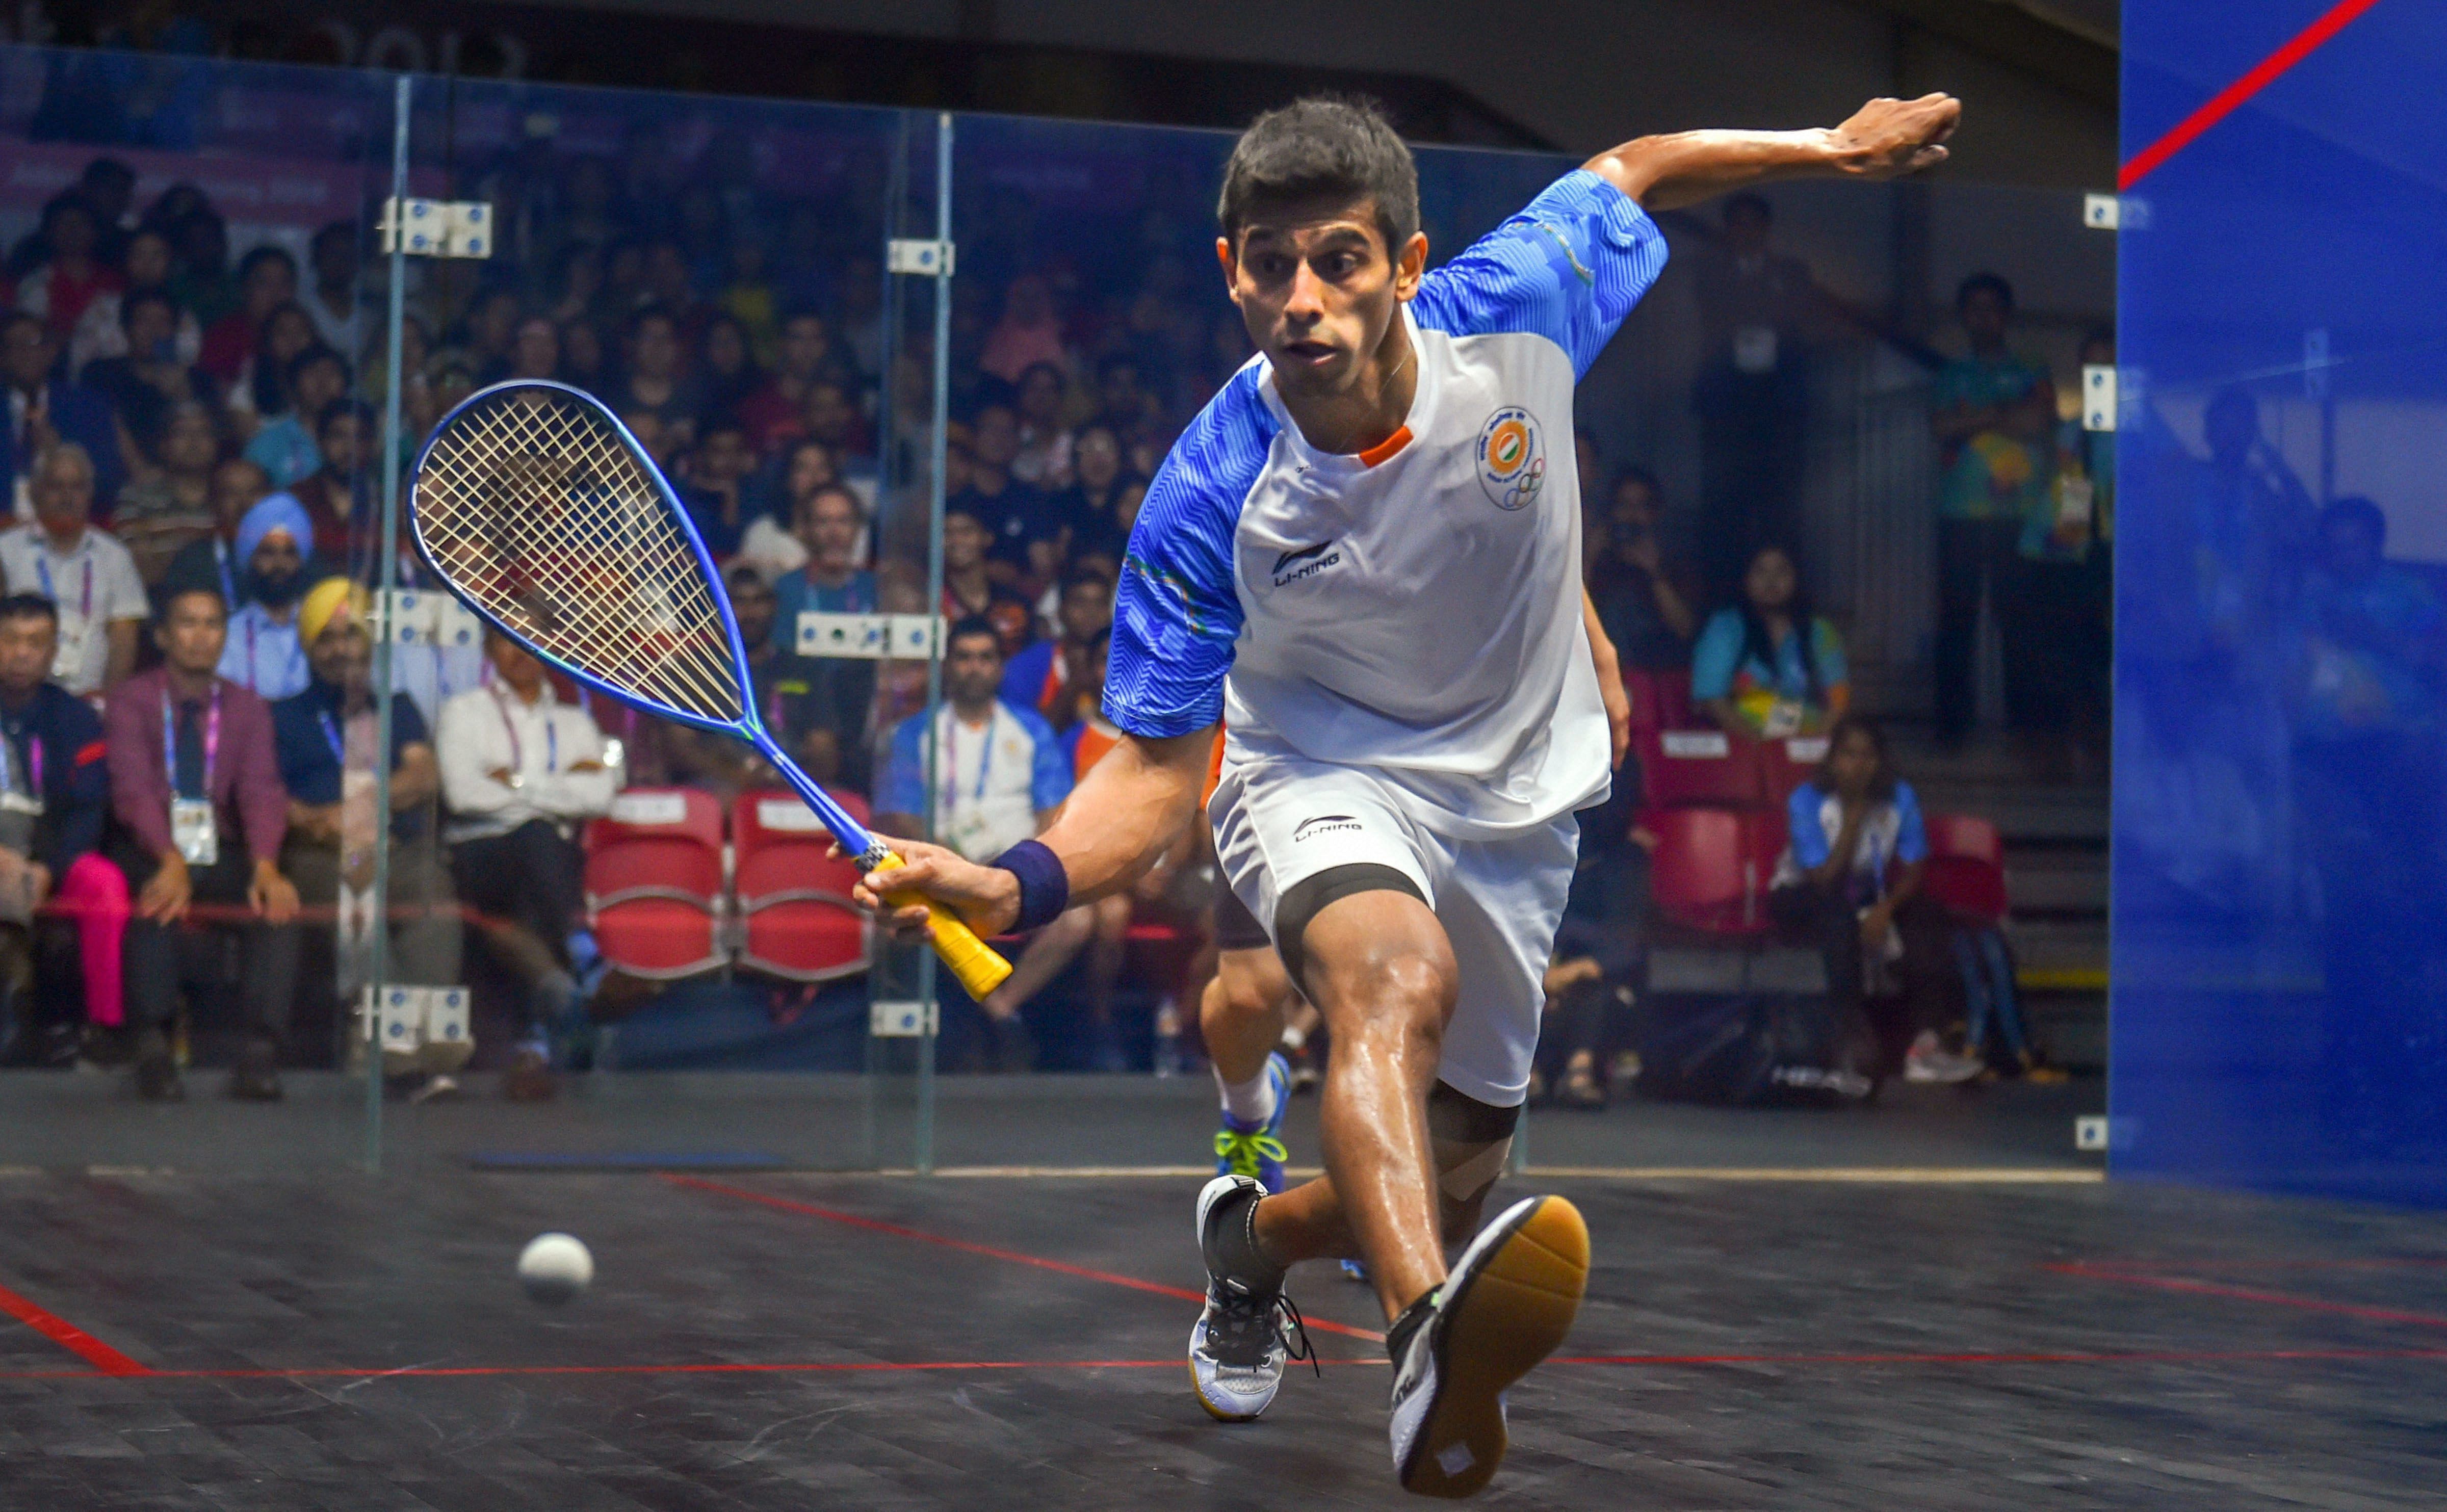  India's Saurav Ghosal in action during men's squash semifinal match against Hong Kong at the 18th Asian Games 2018 in Jakarata. (PTI Photo)